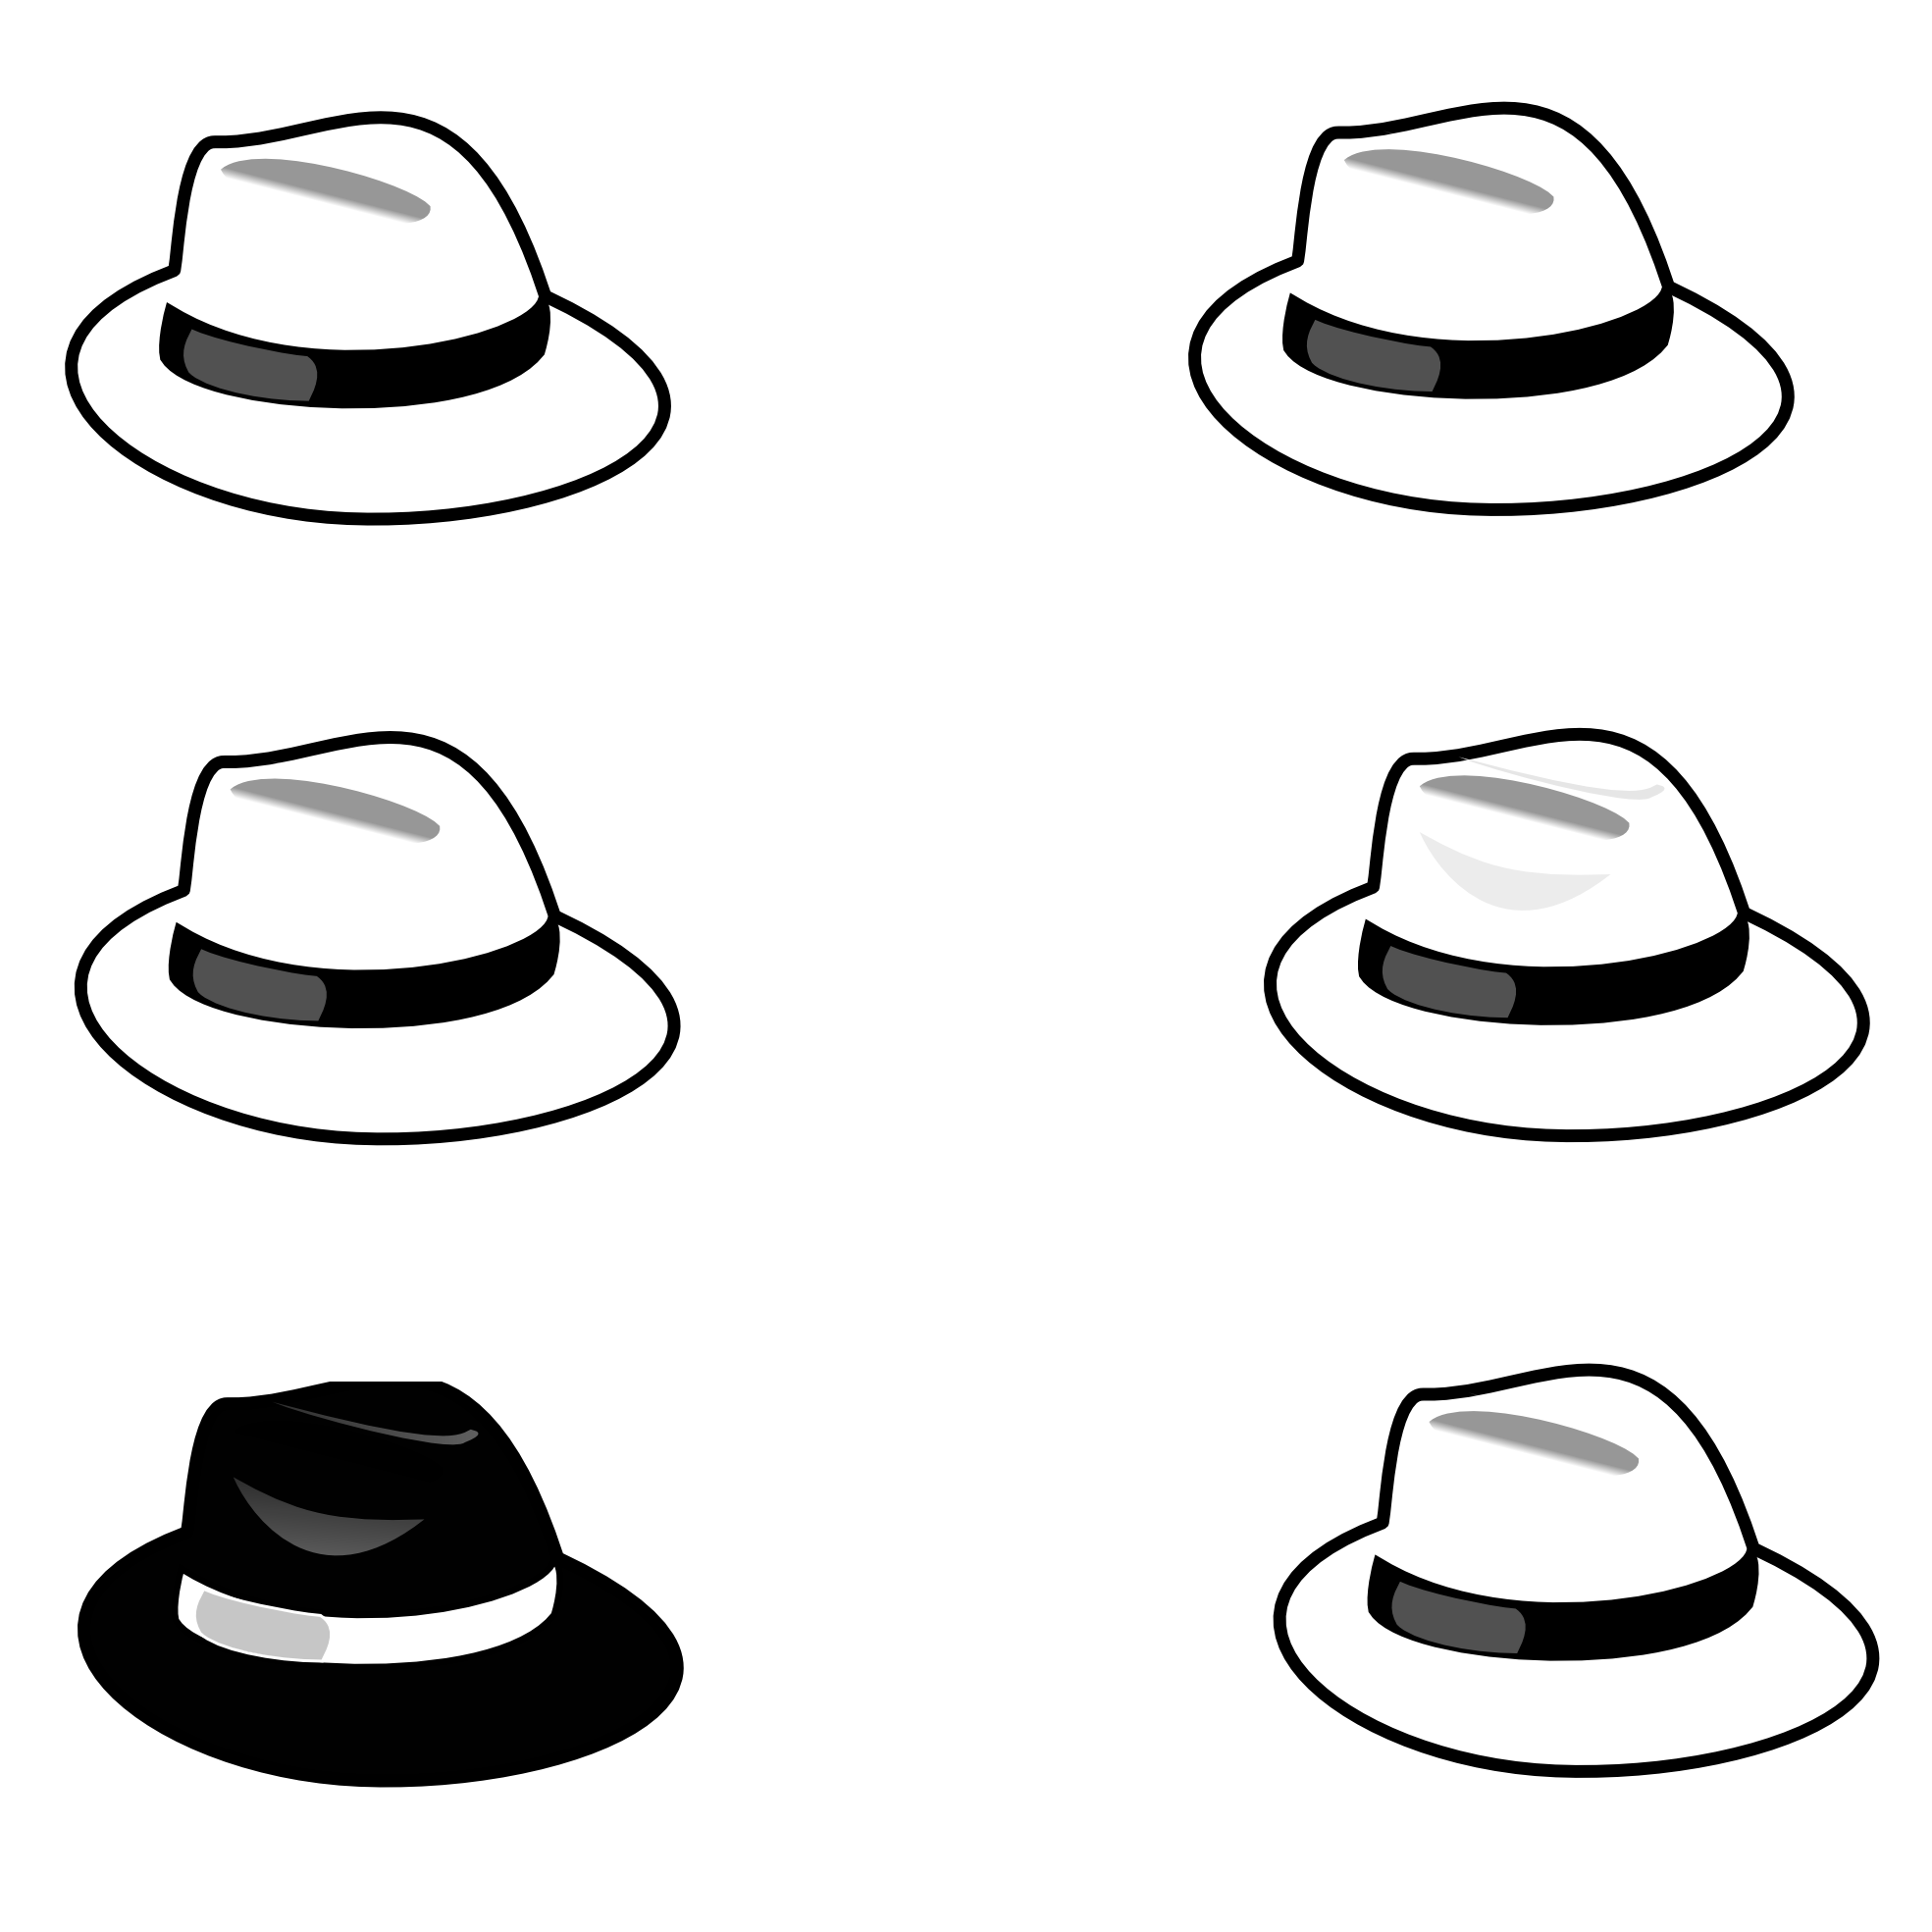 Pirate Hat Clipart Black And White | Clipart library - Free Clipart 